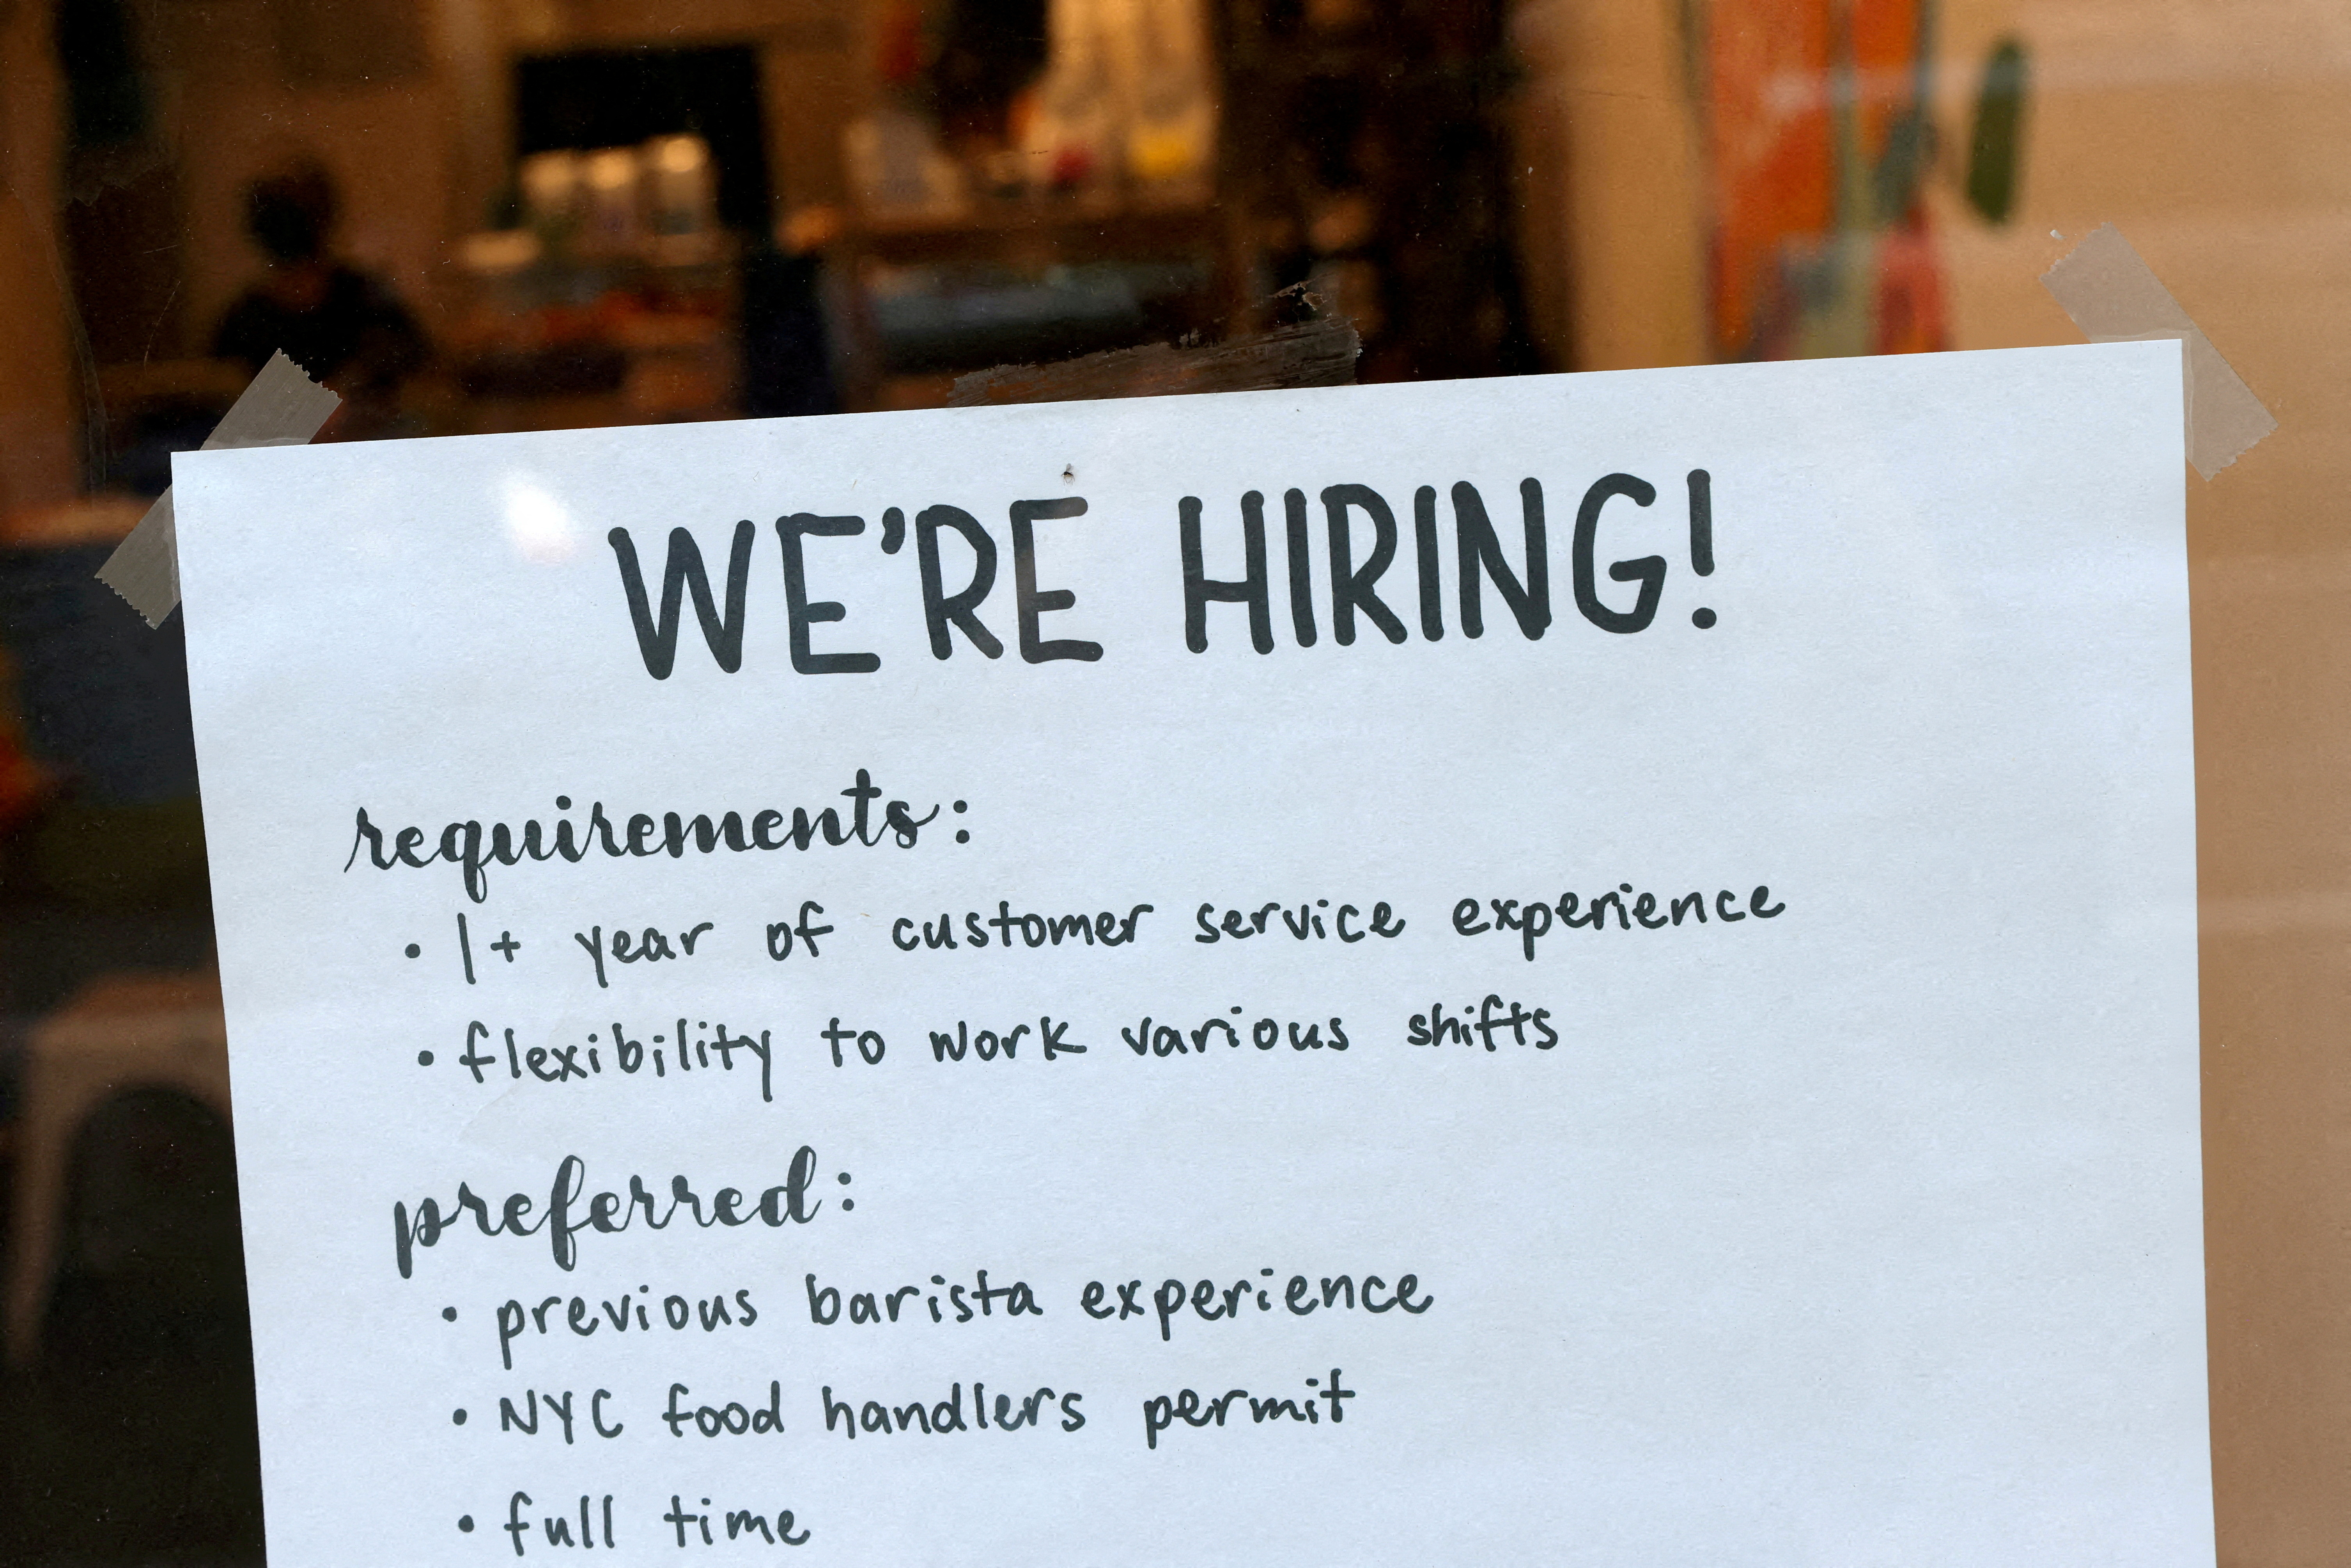 A hiring sign is seen in a cafe in Manhattan, New York City